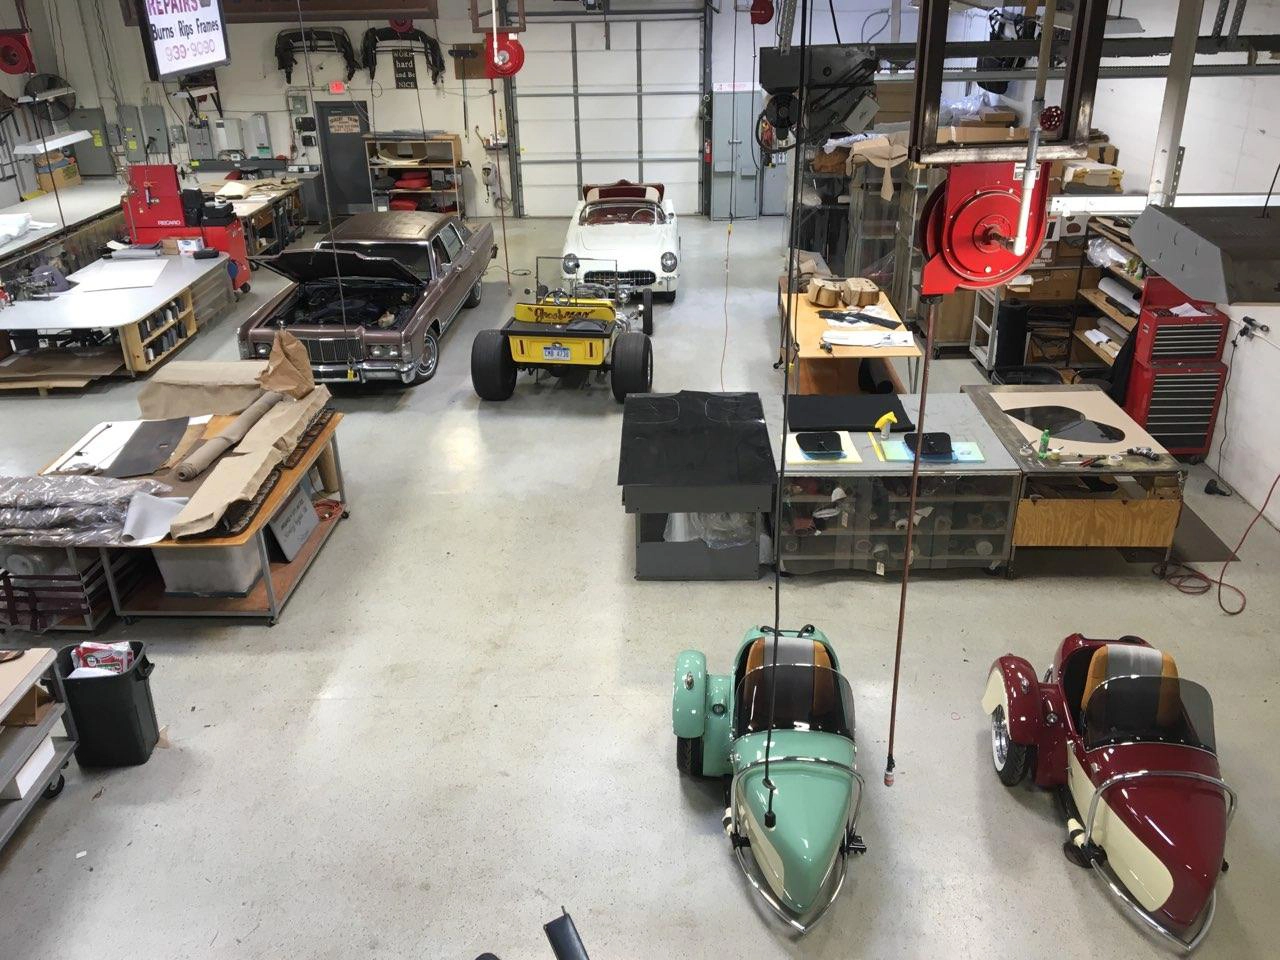 Shop Floor with sidecars